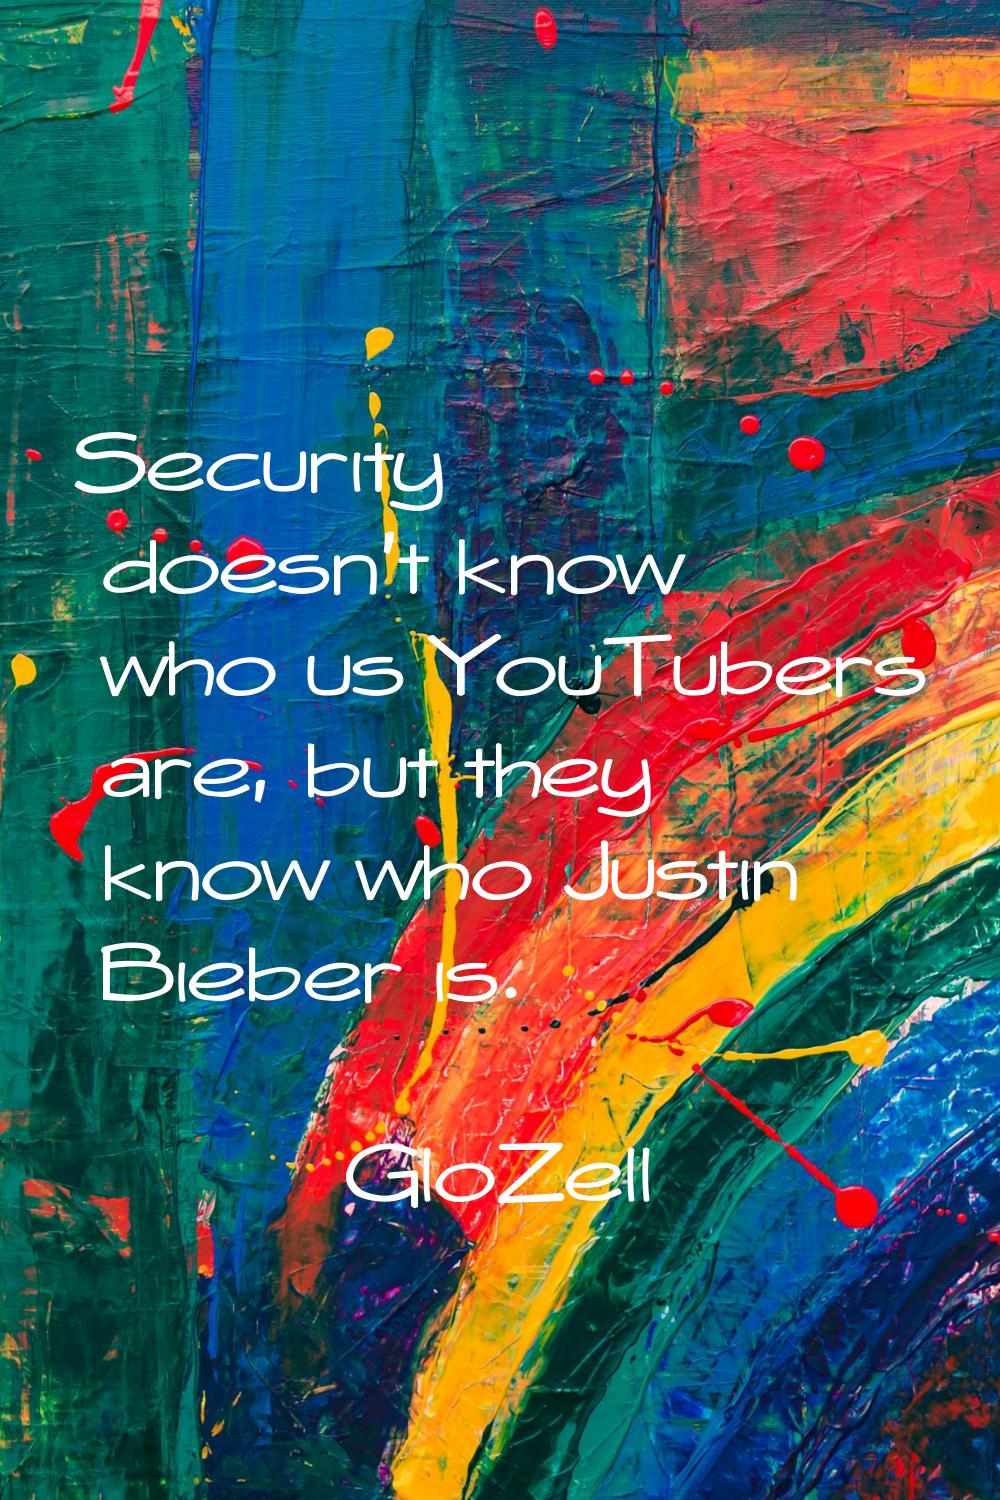 Security doesn't know who us YouTubers are, but they know who Justin Bieber is.